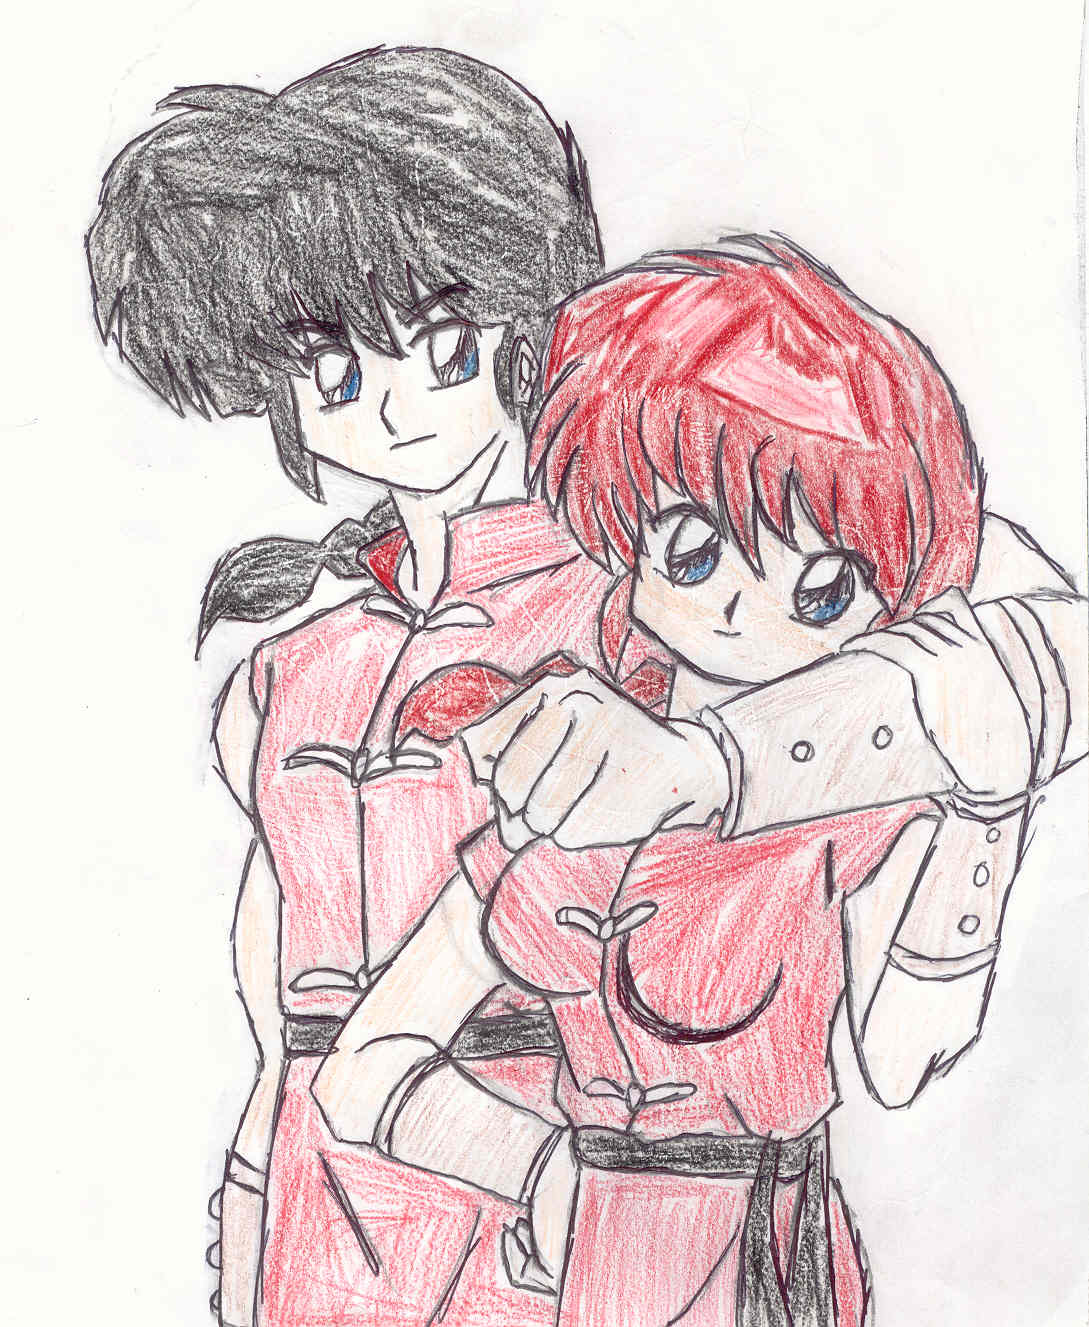 Ranma unleashed by MageKnight007